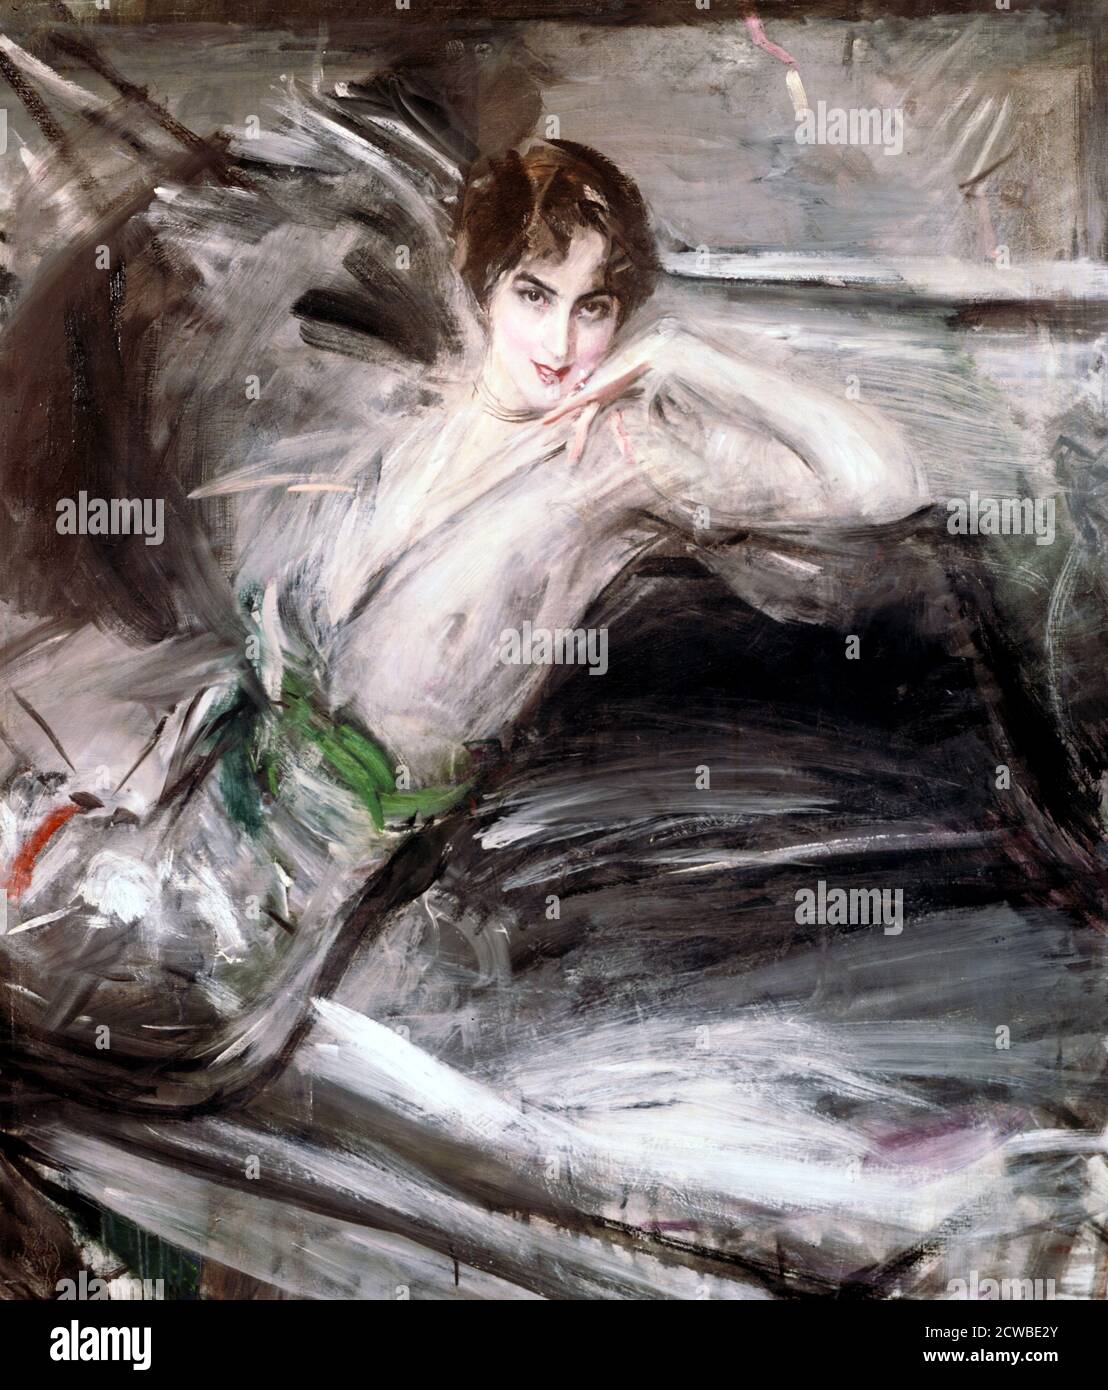 Woman Sat on Chair', c late 19th century. Artist: Giovanni Boldini. Born in Ferrara, Italy in 1845. Like Sargent, he had an international career, working mainly in Paris, but also in England where he was well known in London. Stock Photo